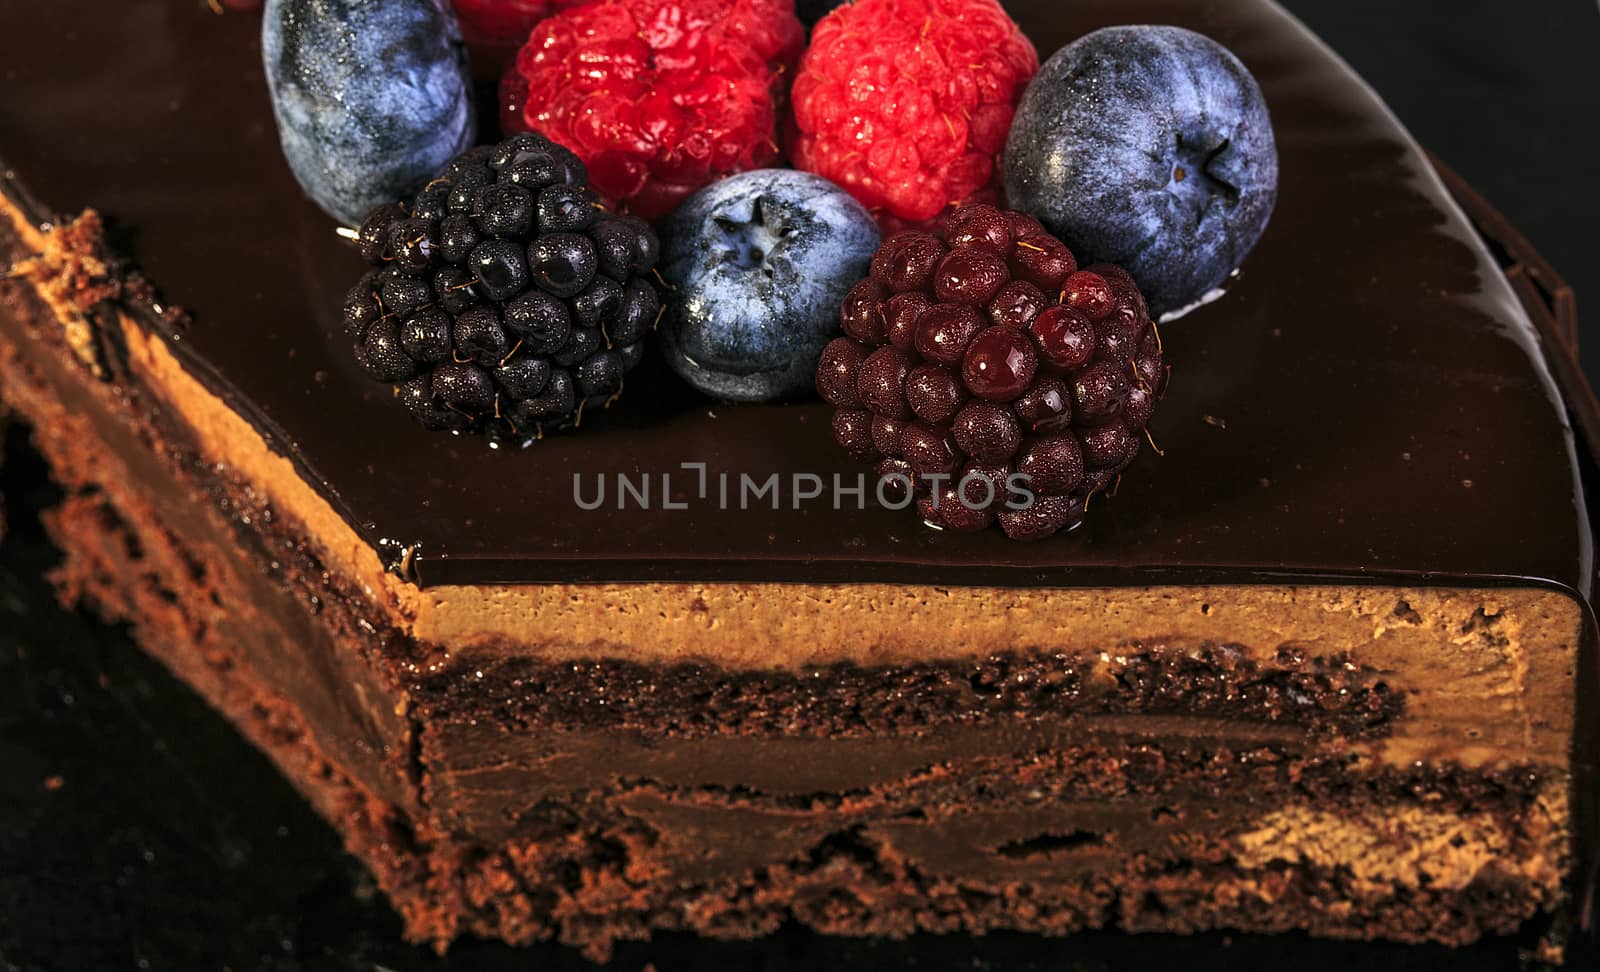 Delicious red fruits pie with chocolate